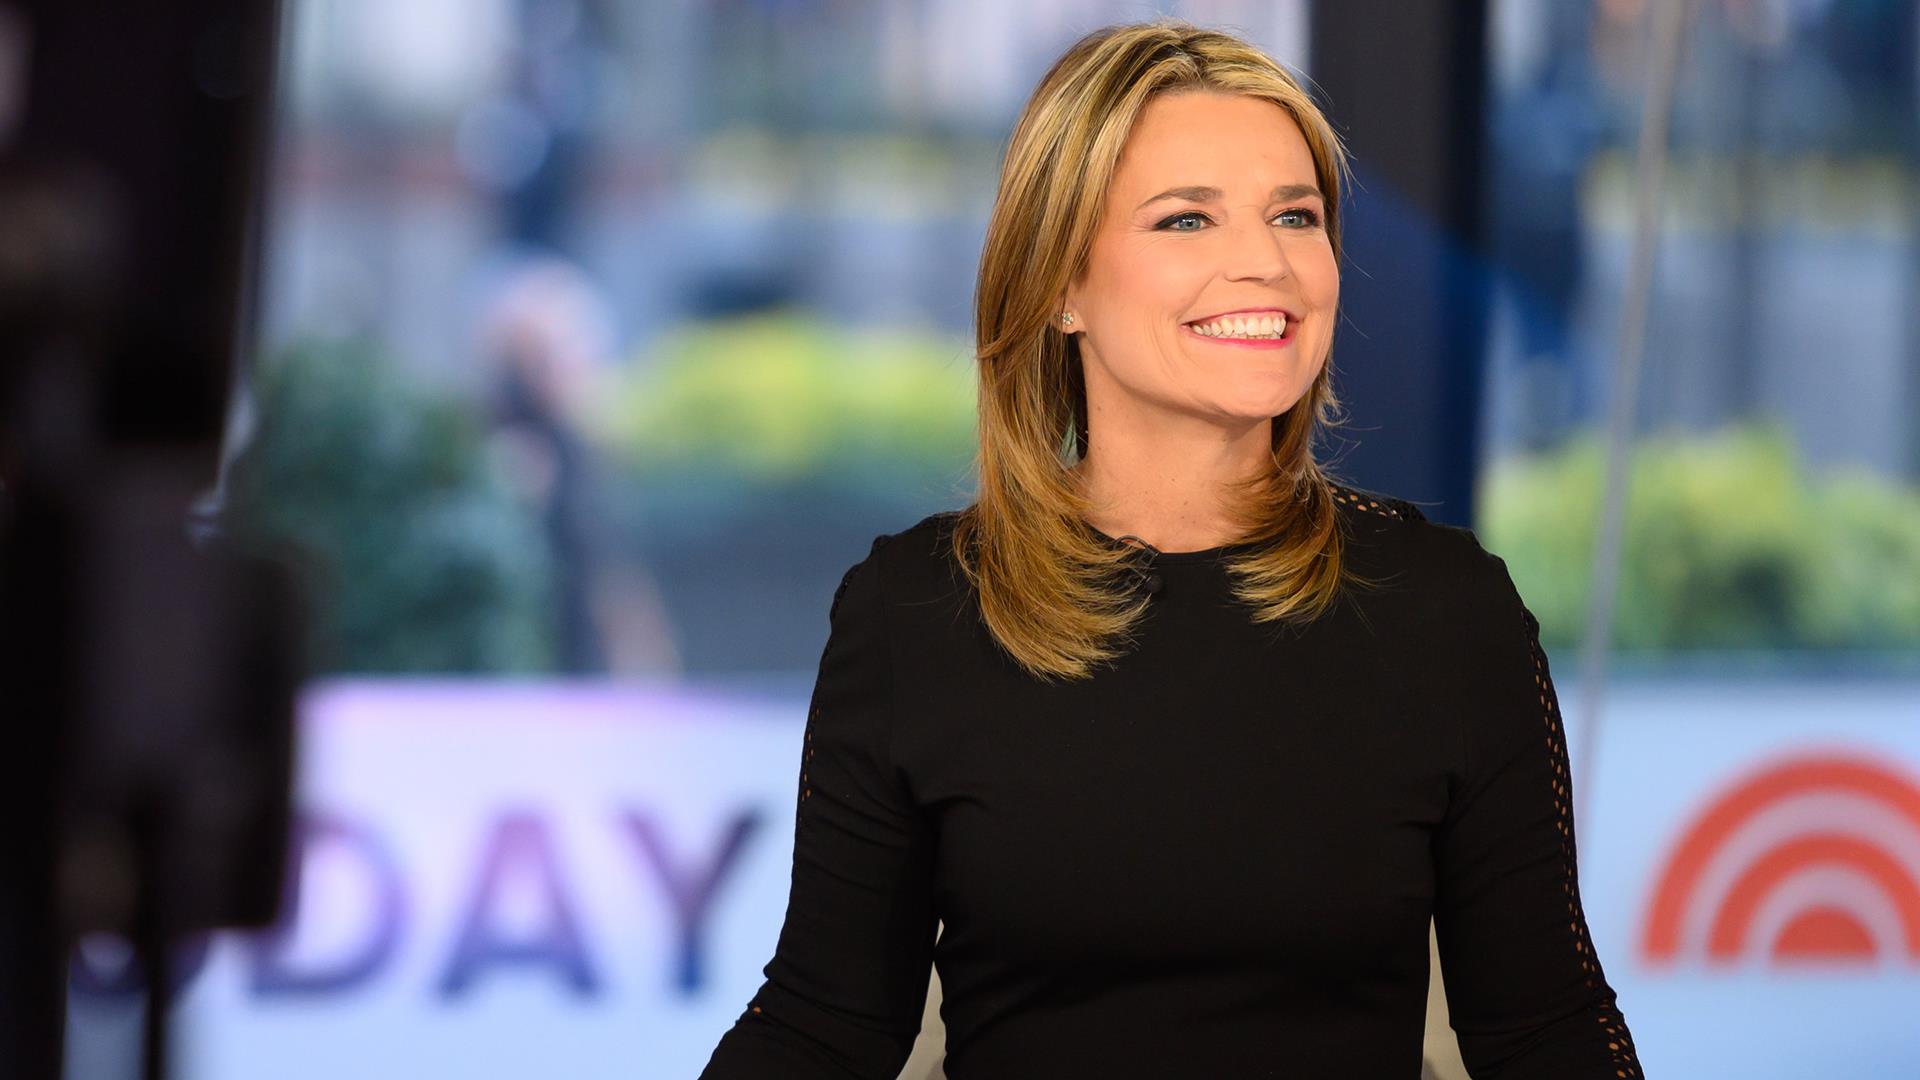 See Savannah Guthrie and her family in People’s 2019 Beautiful Issue.